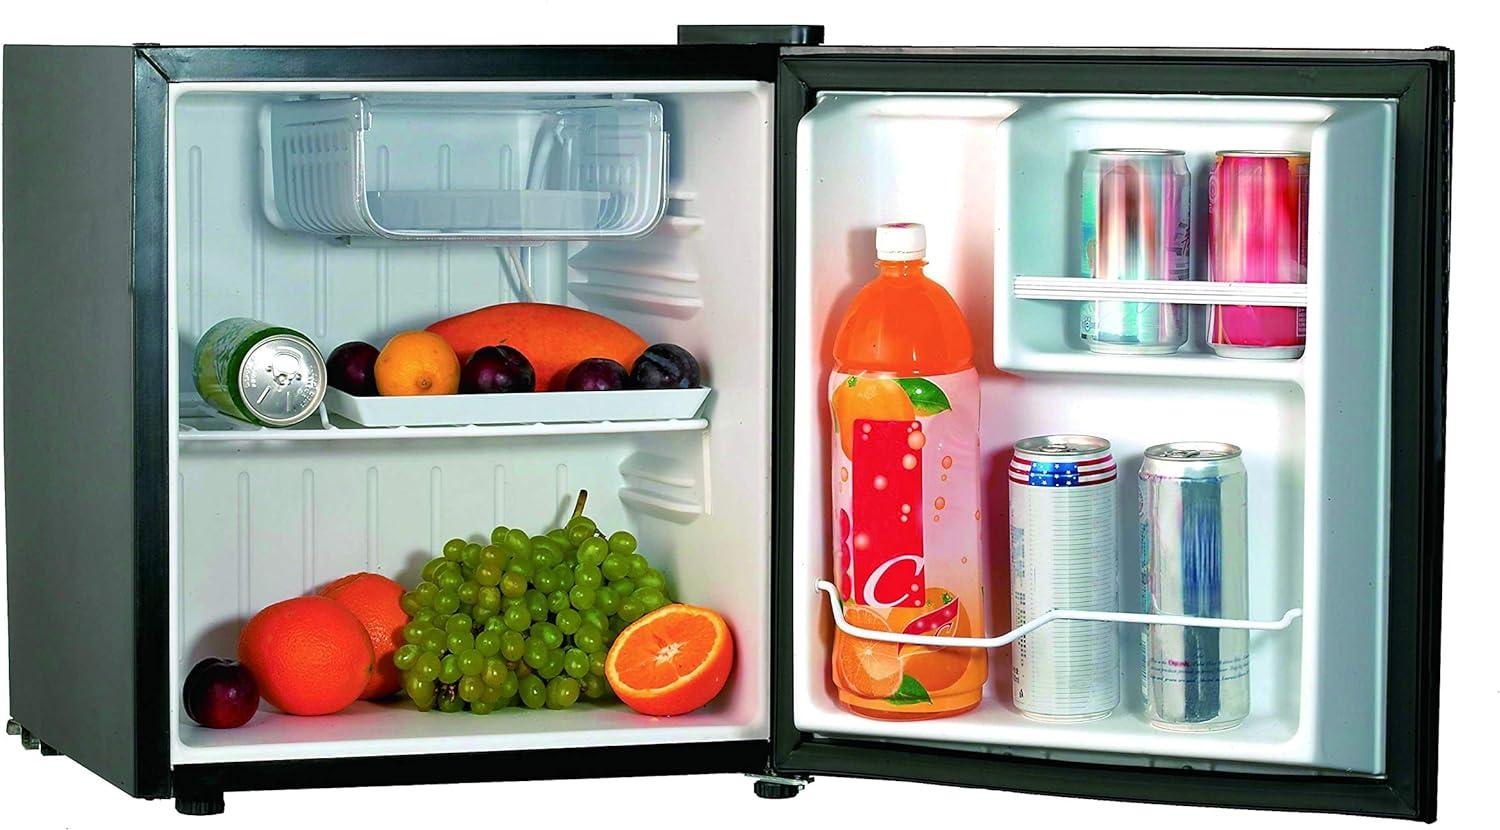 Frigidaire Stainless Steel Mini Fridge EFR182 for $88 Shipped